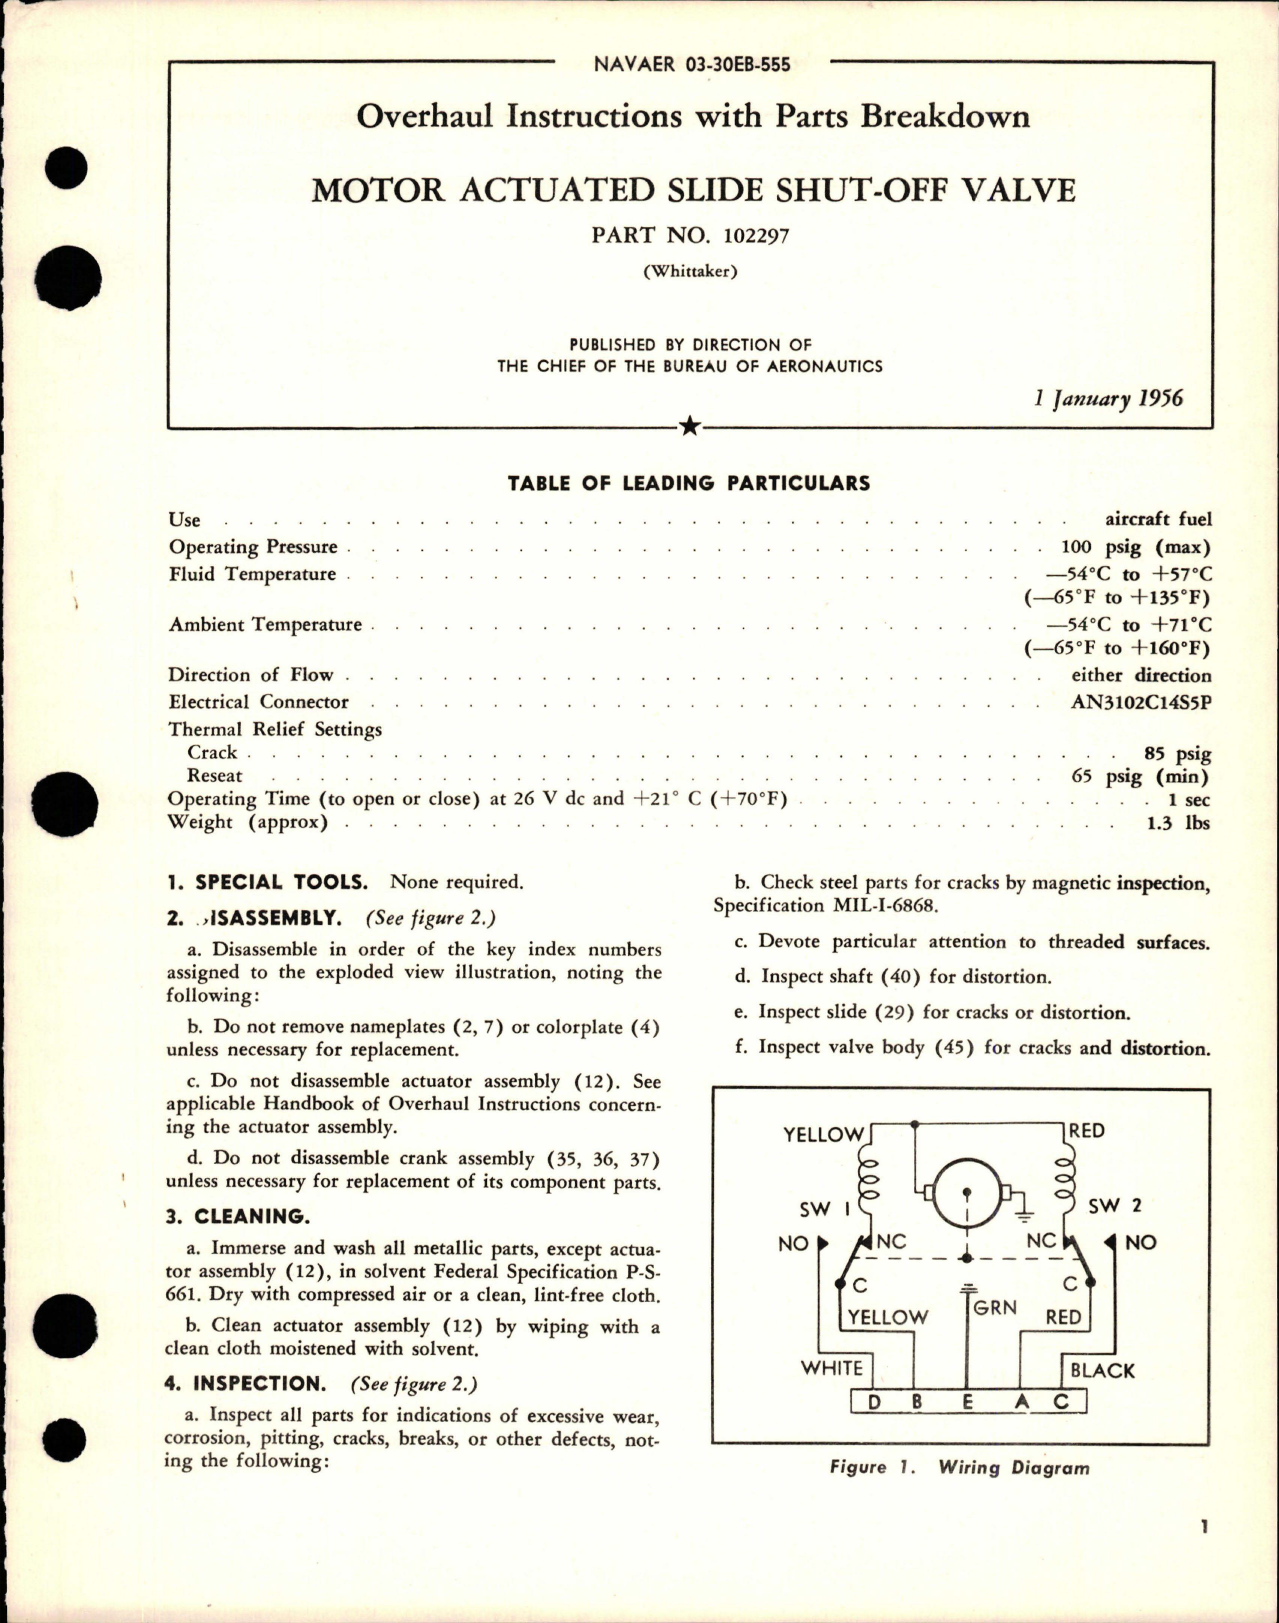 Sample page 1 from AirCorps Library document: Overhaul Instructions with Parts for Motor Actuated Slide Shut Off Valve - Part 102297 